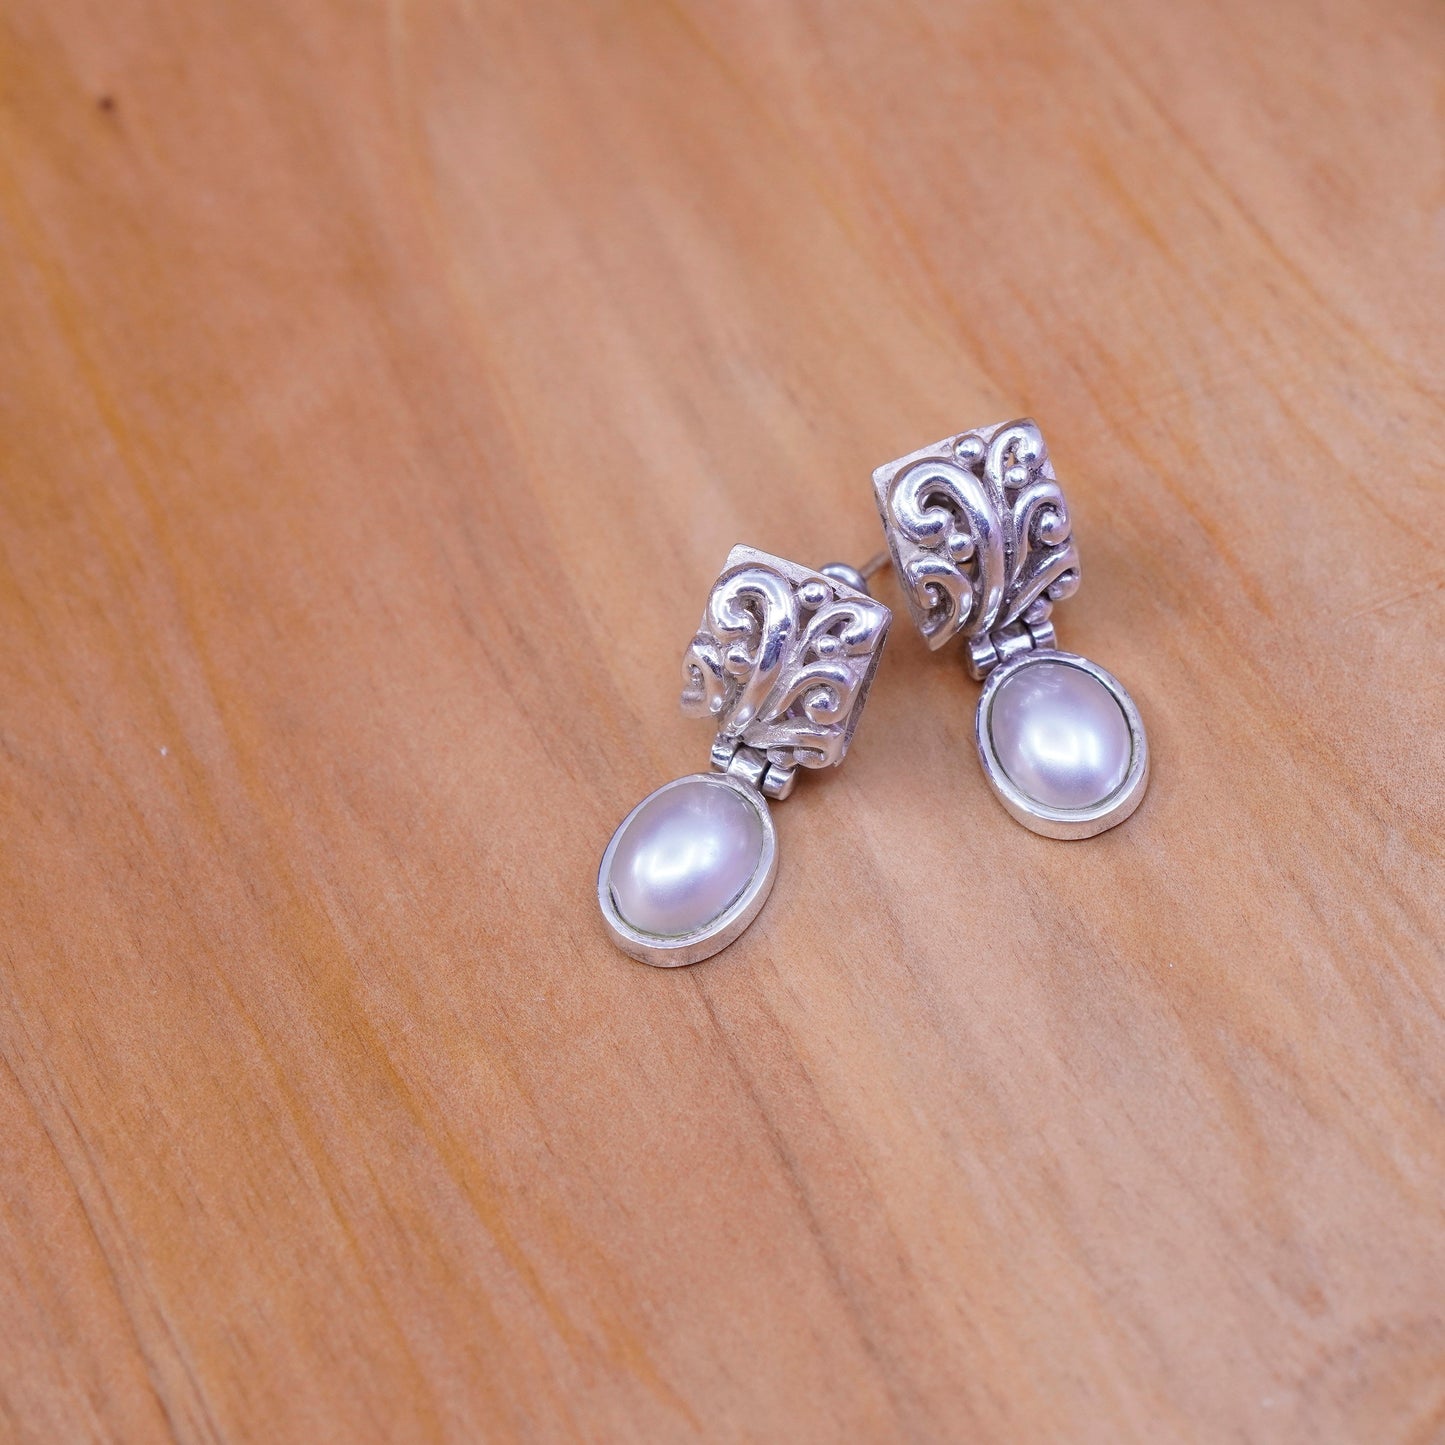 Sterling silver earrings, 925 studs with freshwater pearl drop and filigree